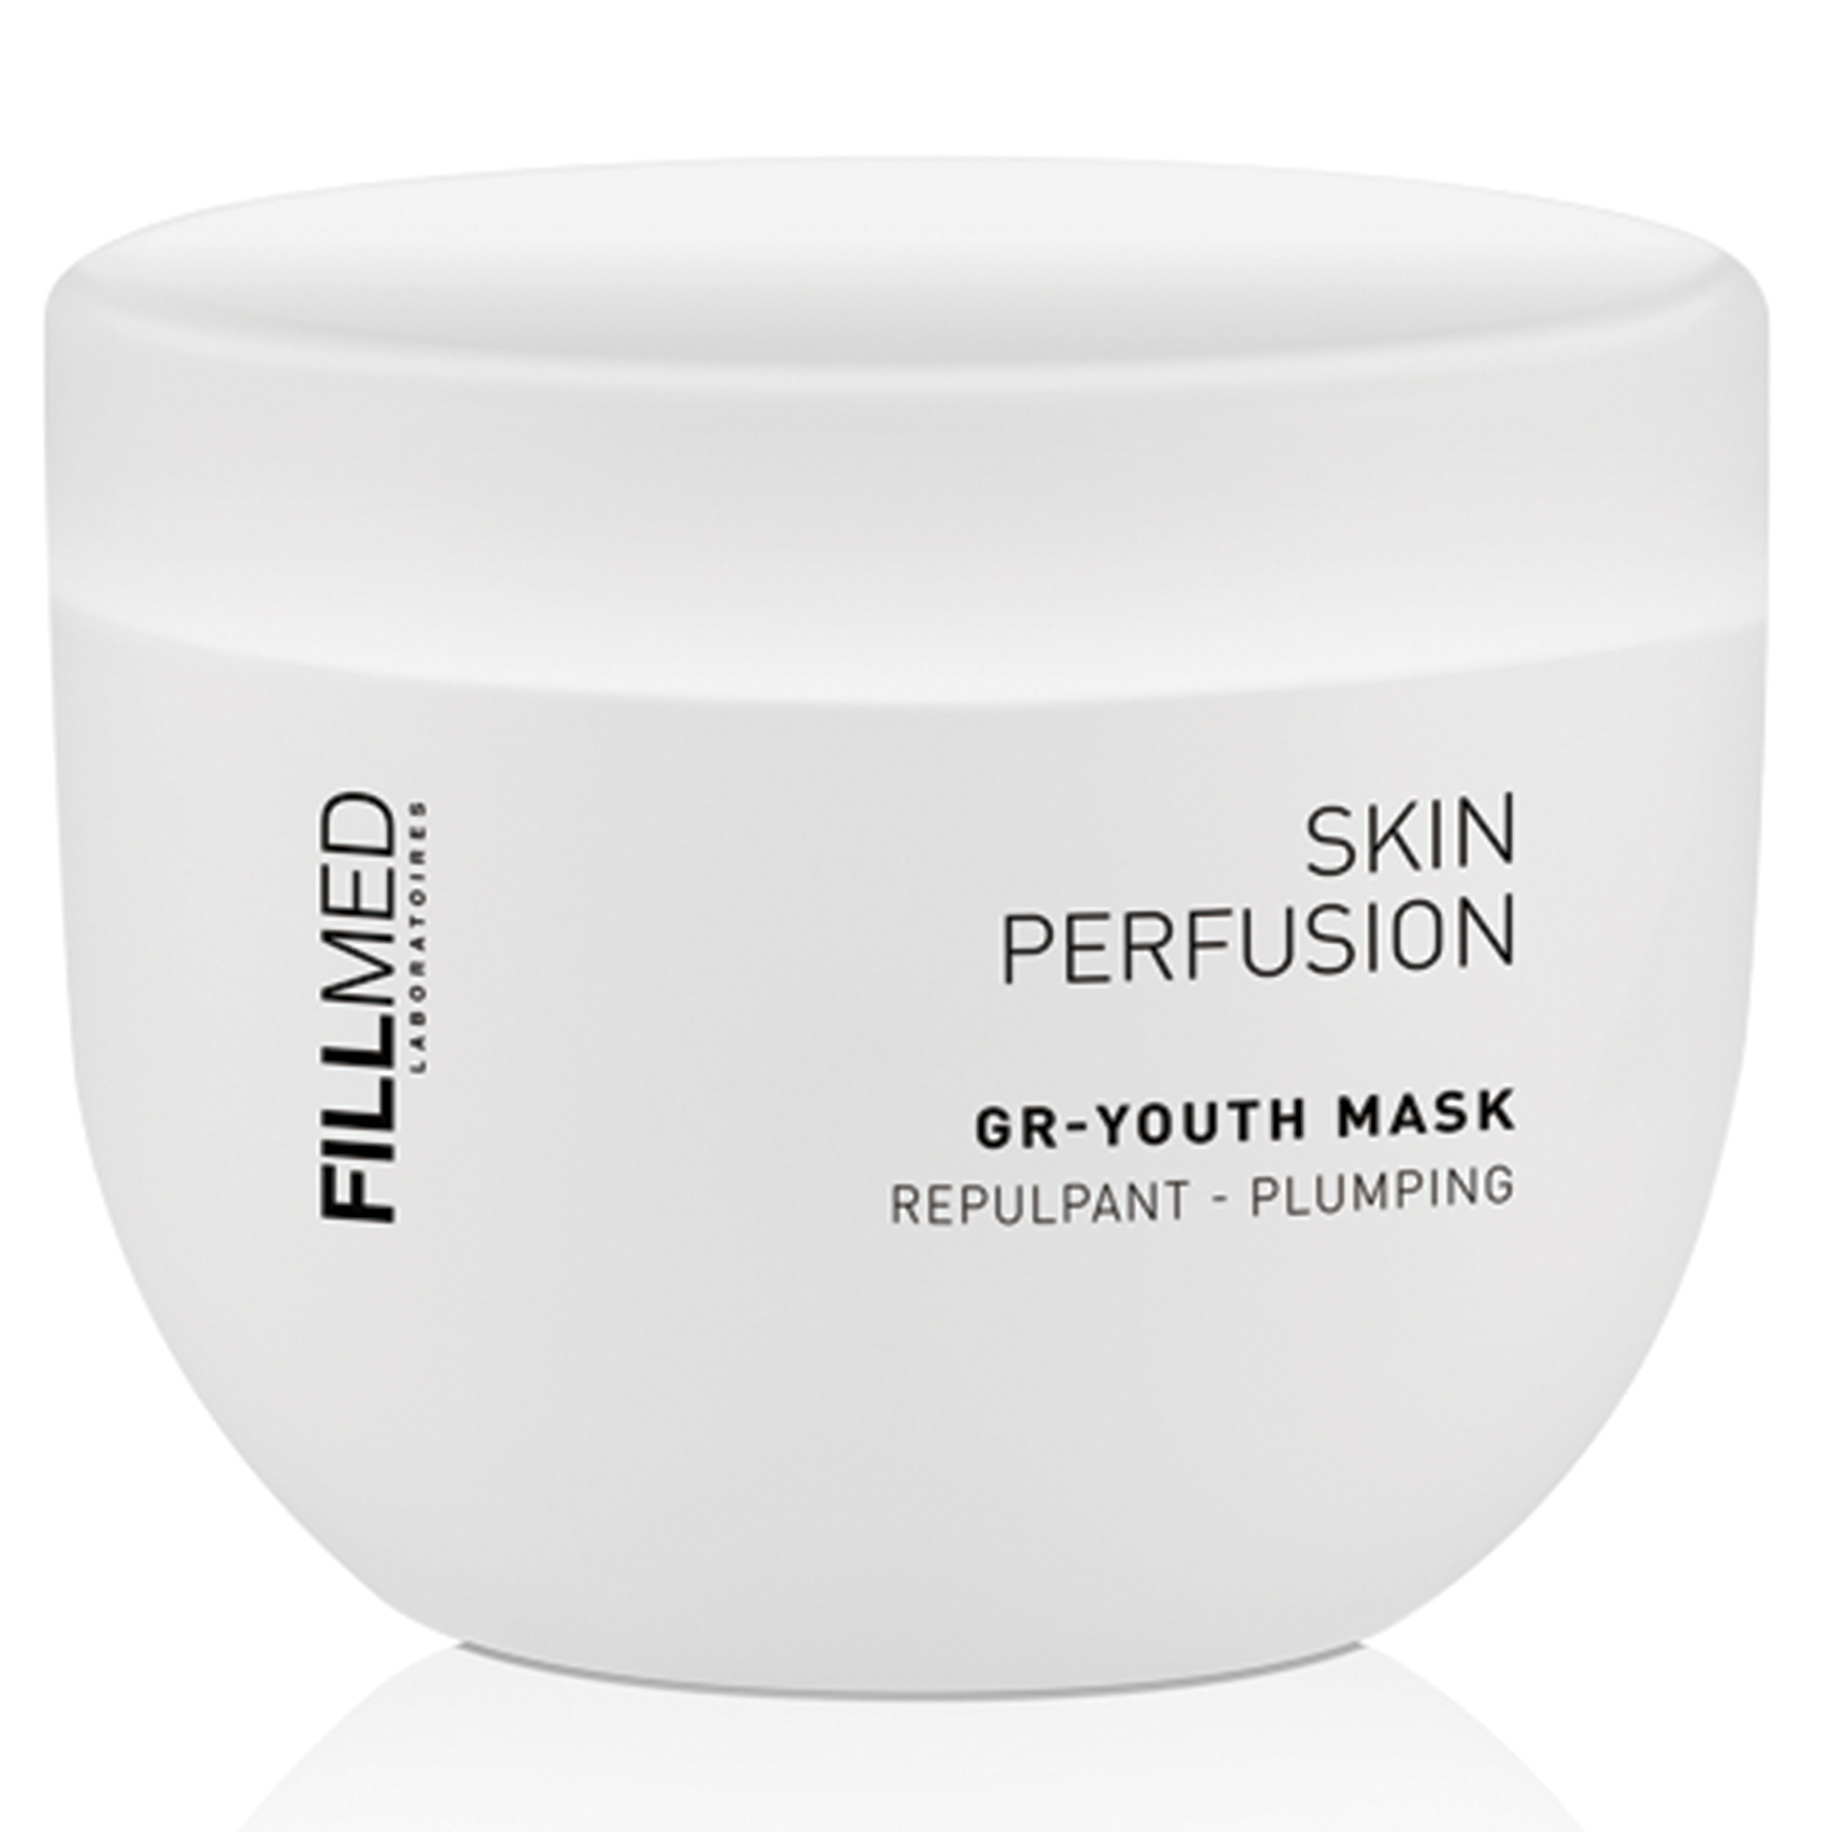 Fillmed Skin Perfusion GR-Youth Mask 